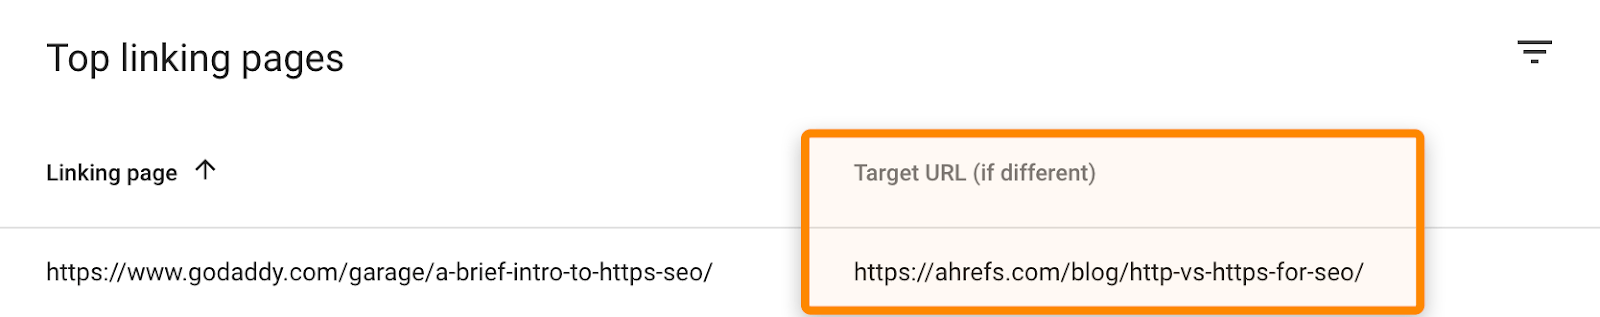 10 target url if different